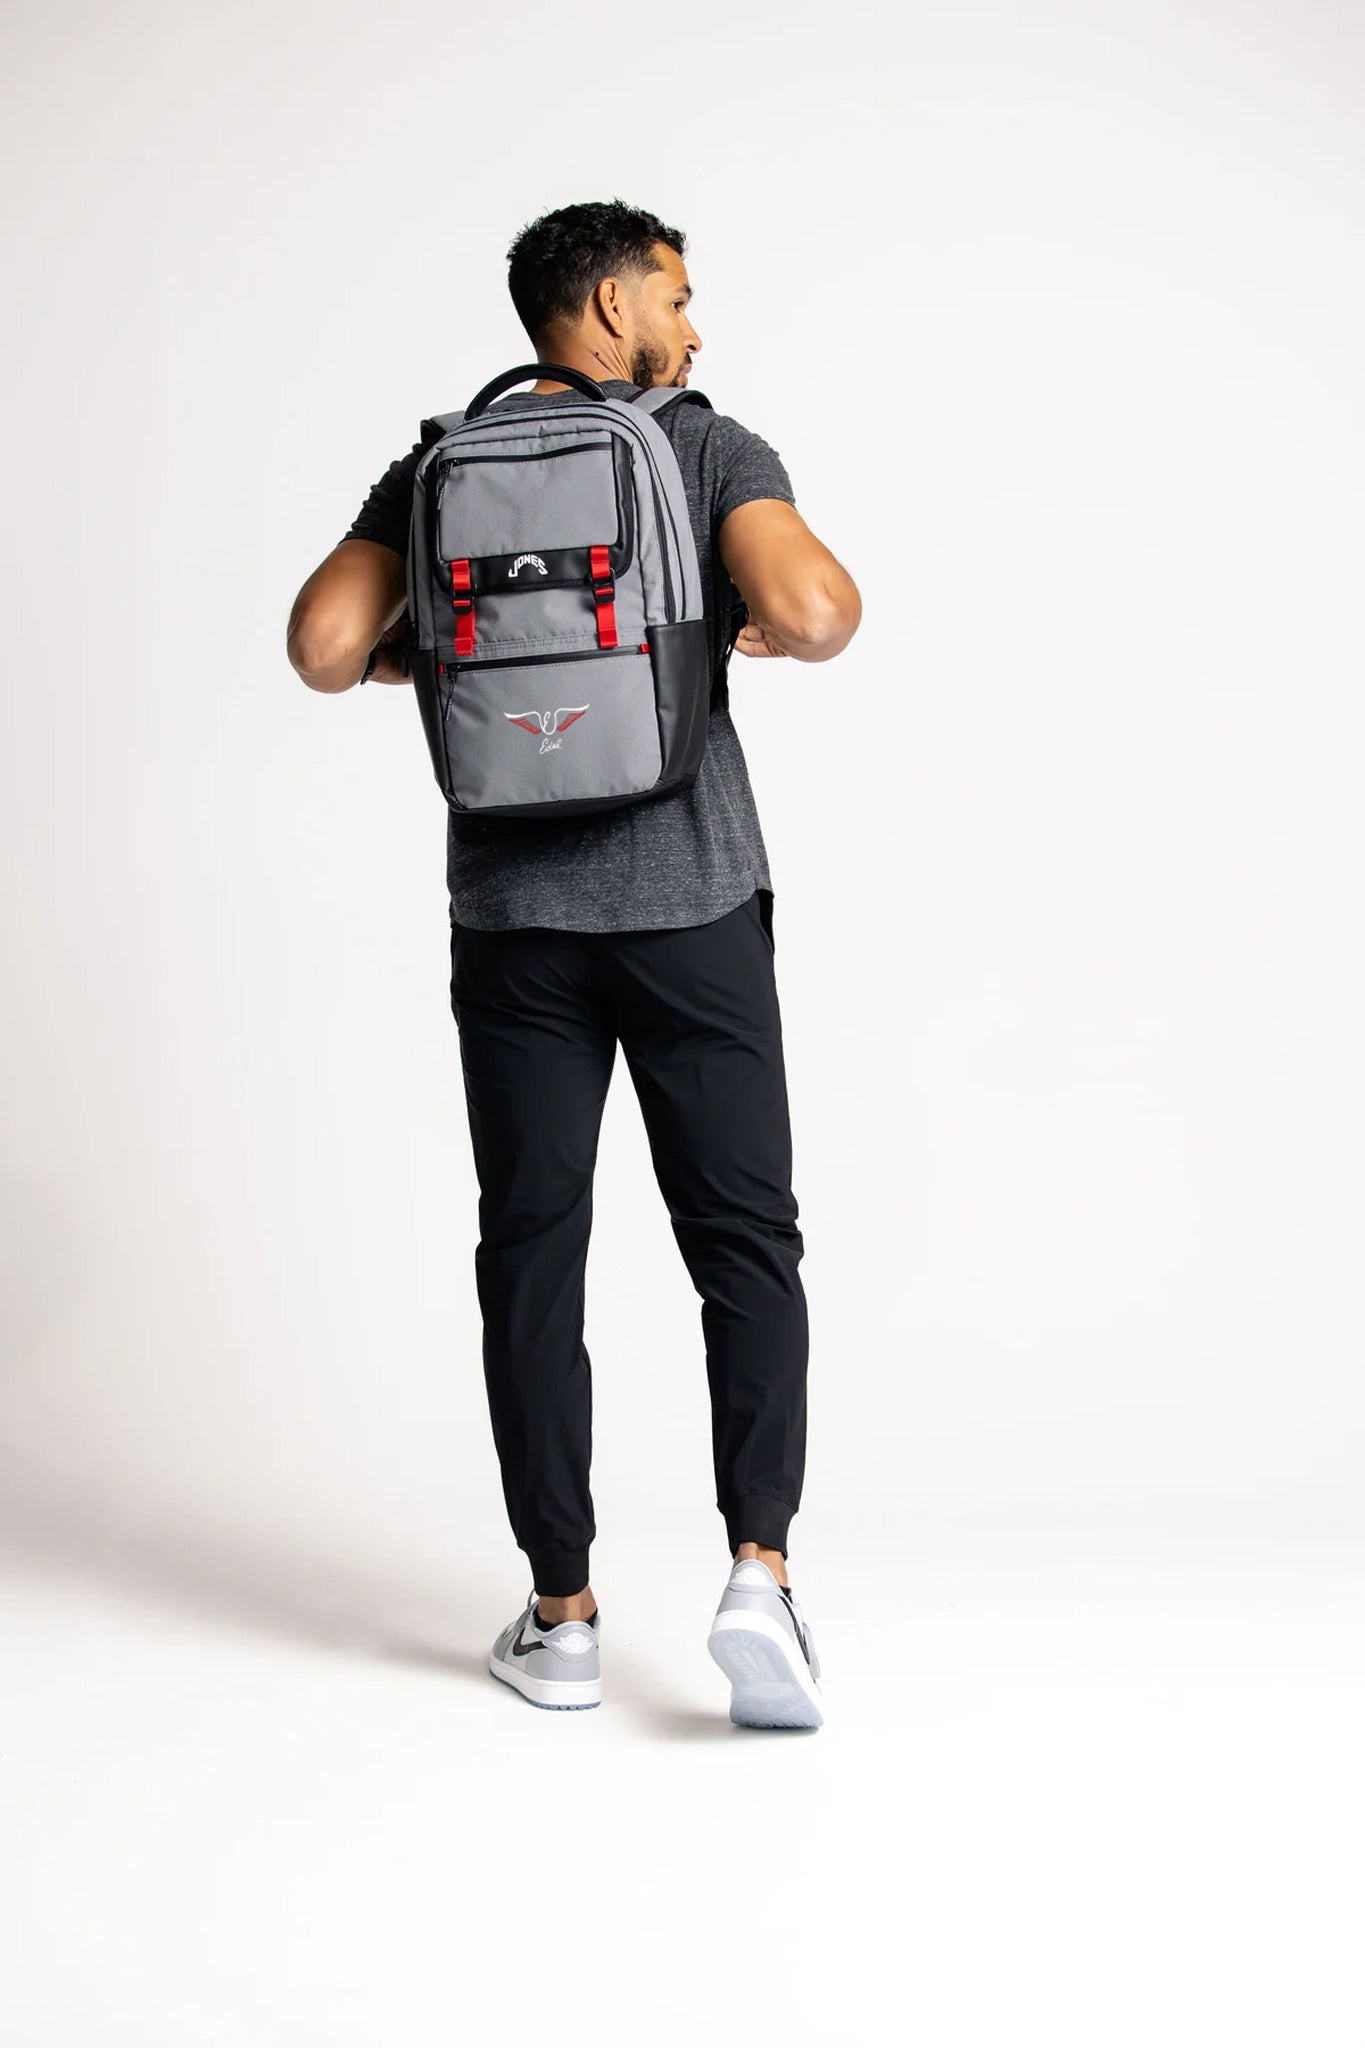 Edel X Jones A2 Backpack R on a person